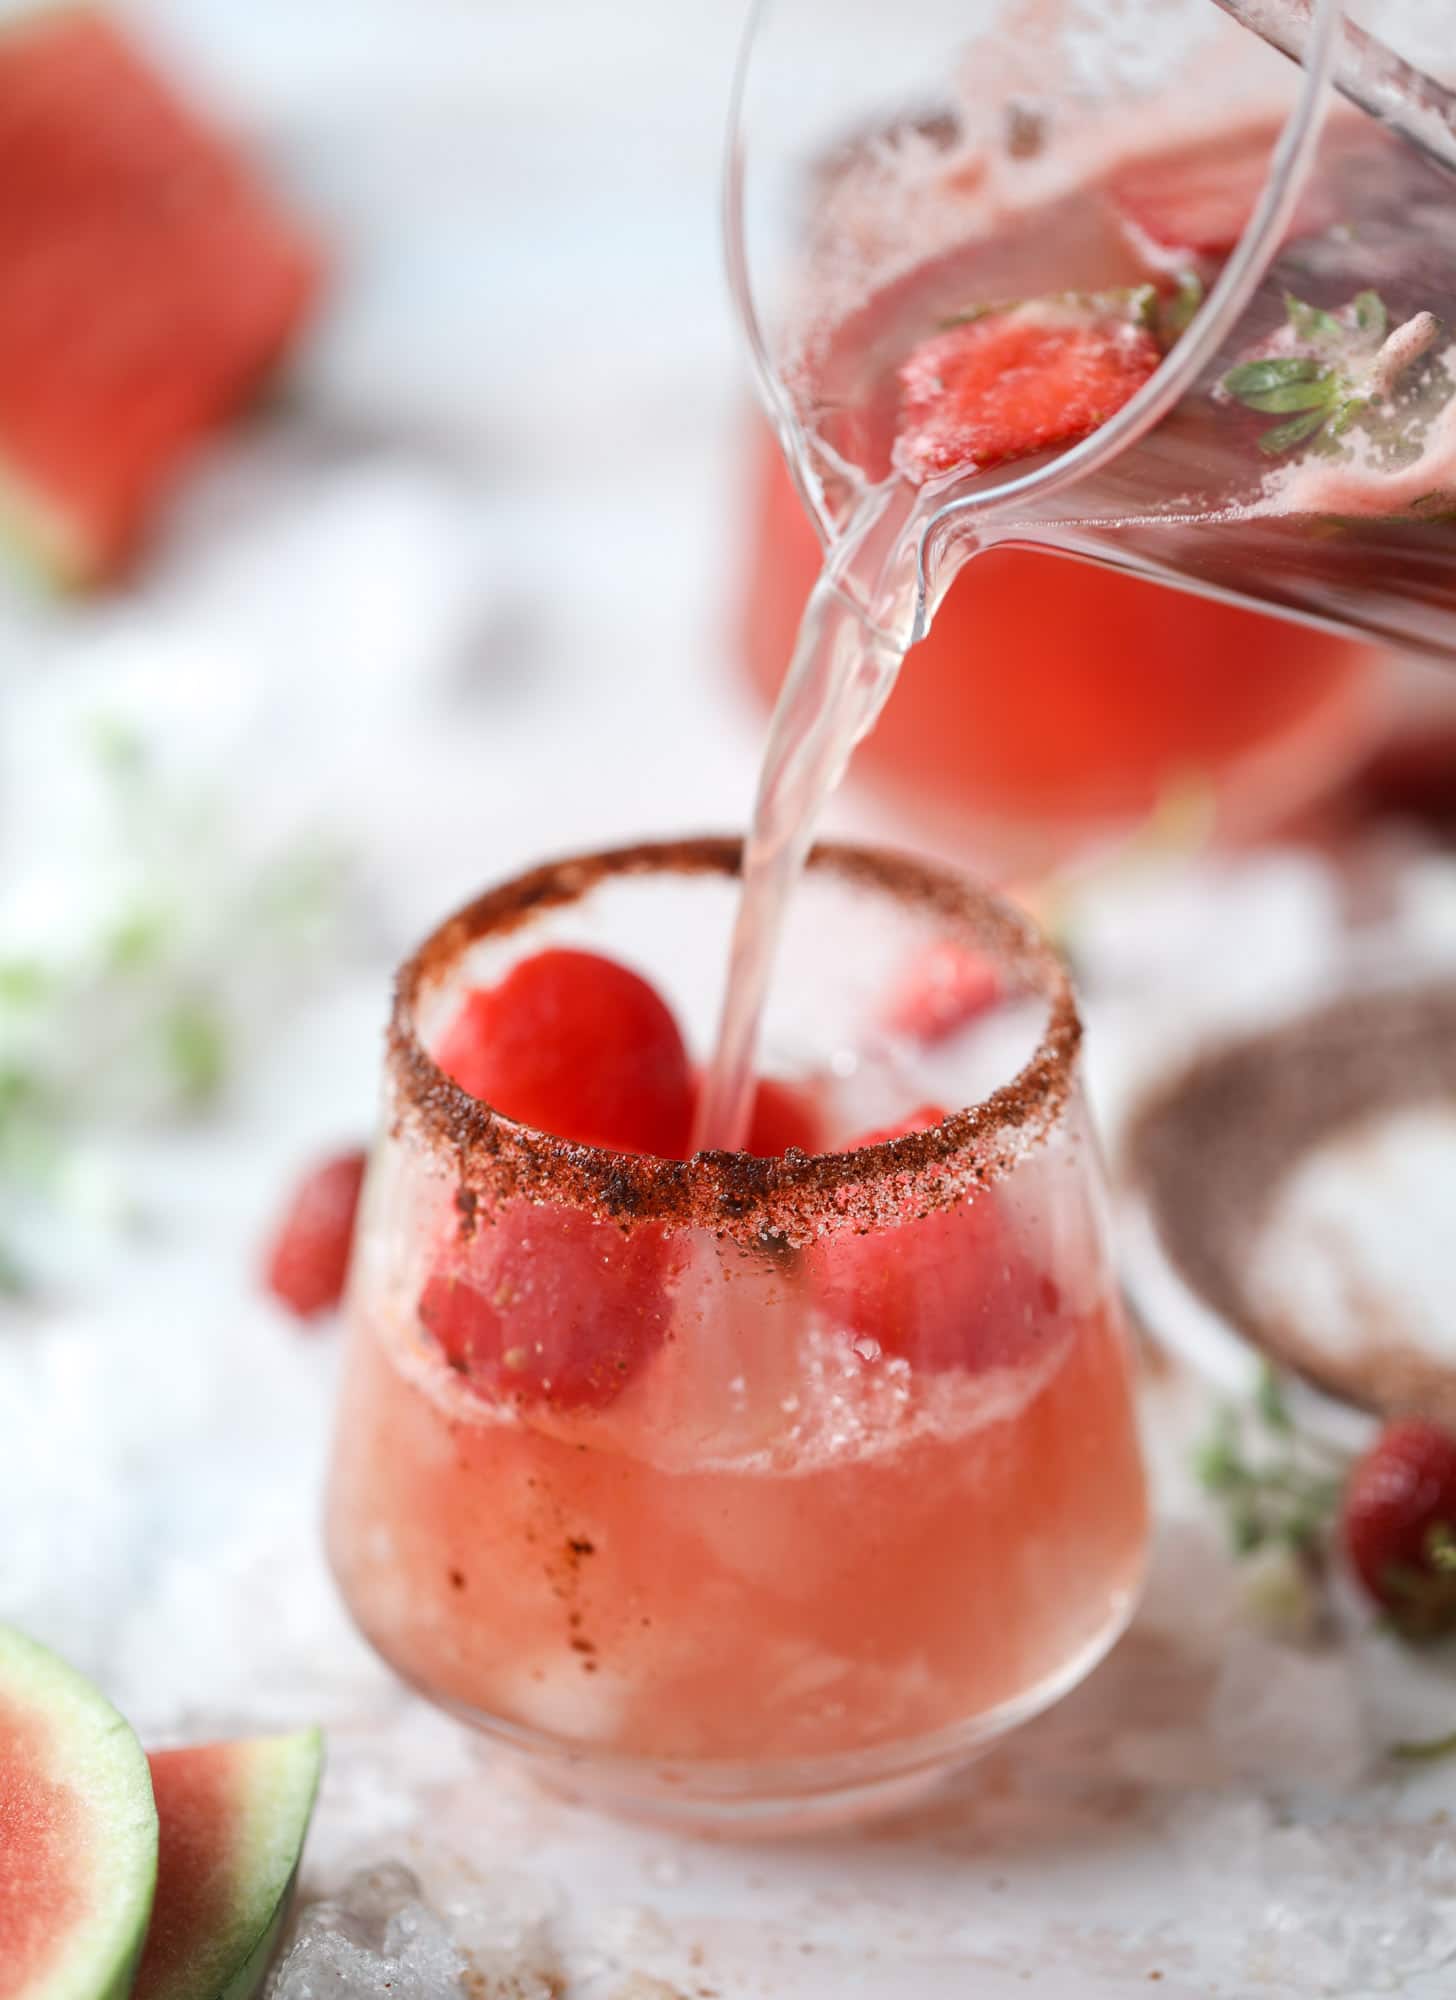 This spicy watermelon sangria is super refreshing, light, delicious and perfect for a hot summer day! Complete with an entire bottle of rosé, watermelon juice, melon balls, strawberries and brandy, this is the best summer cocktail in a pitcher! I howsweeteats.com #spicy #watermelon #sangria #cocktails #rosé